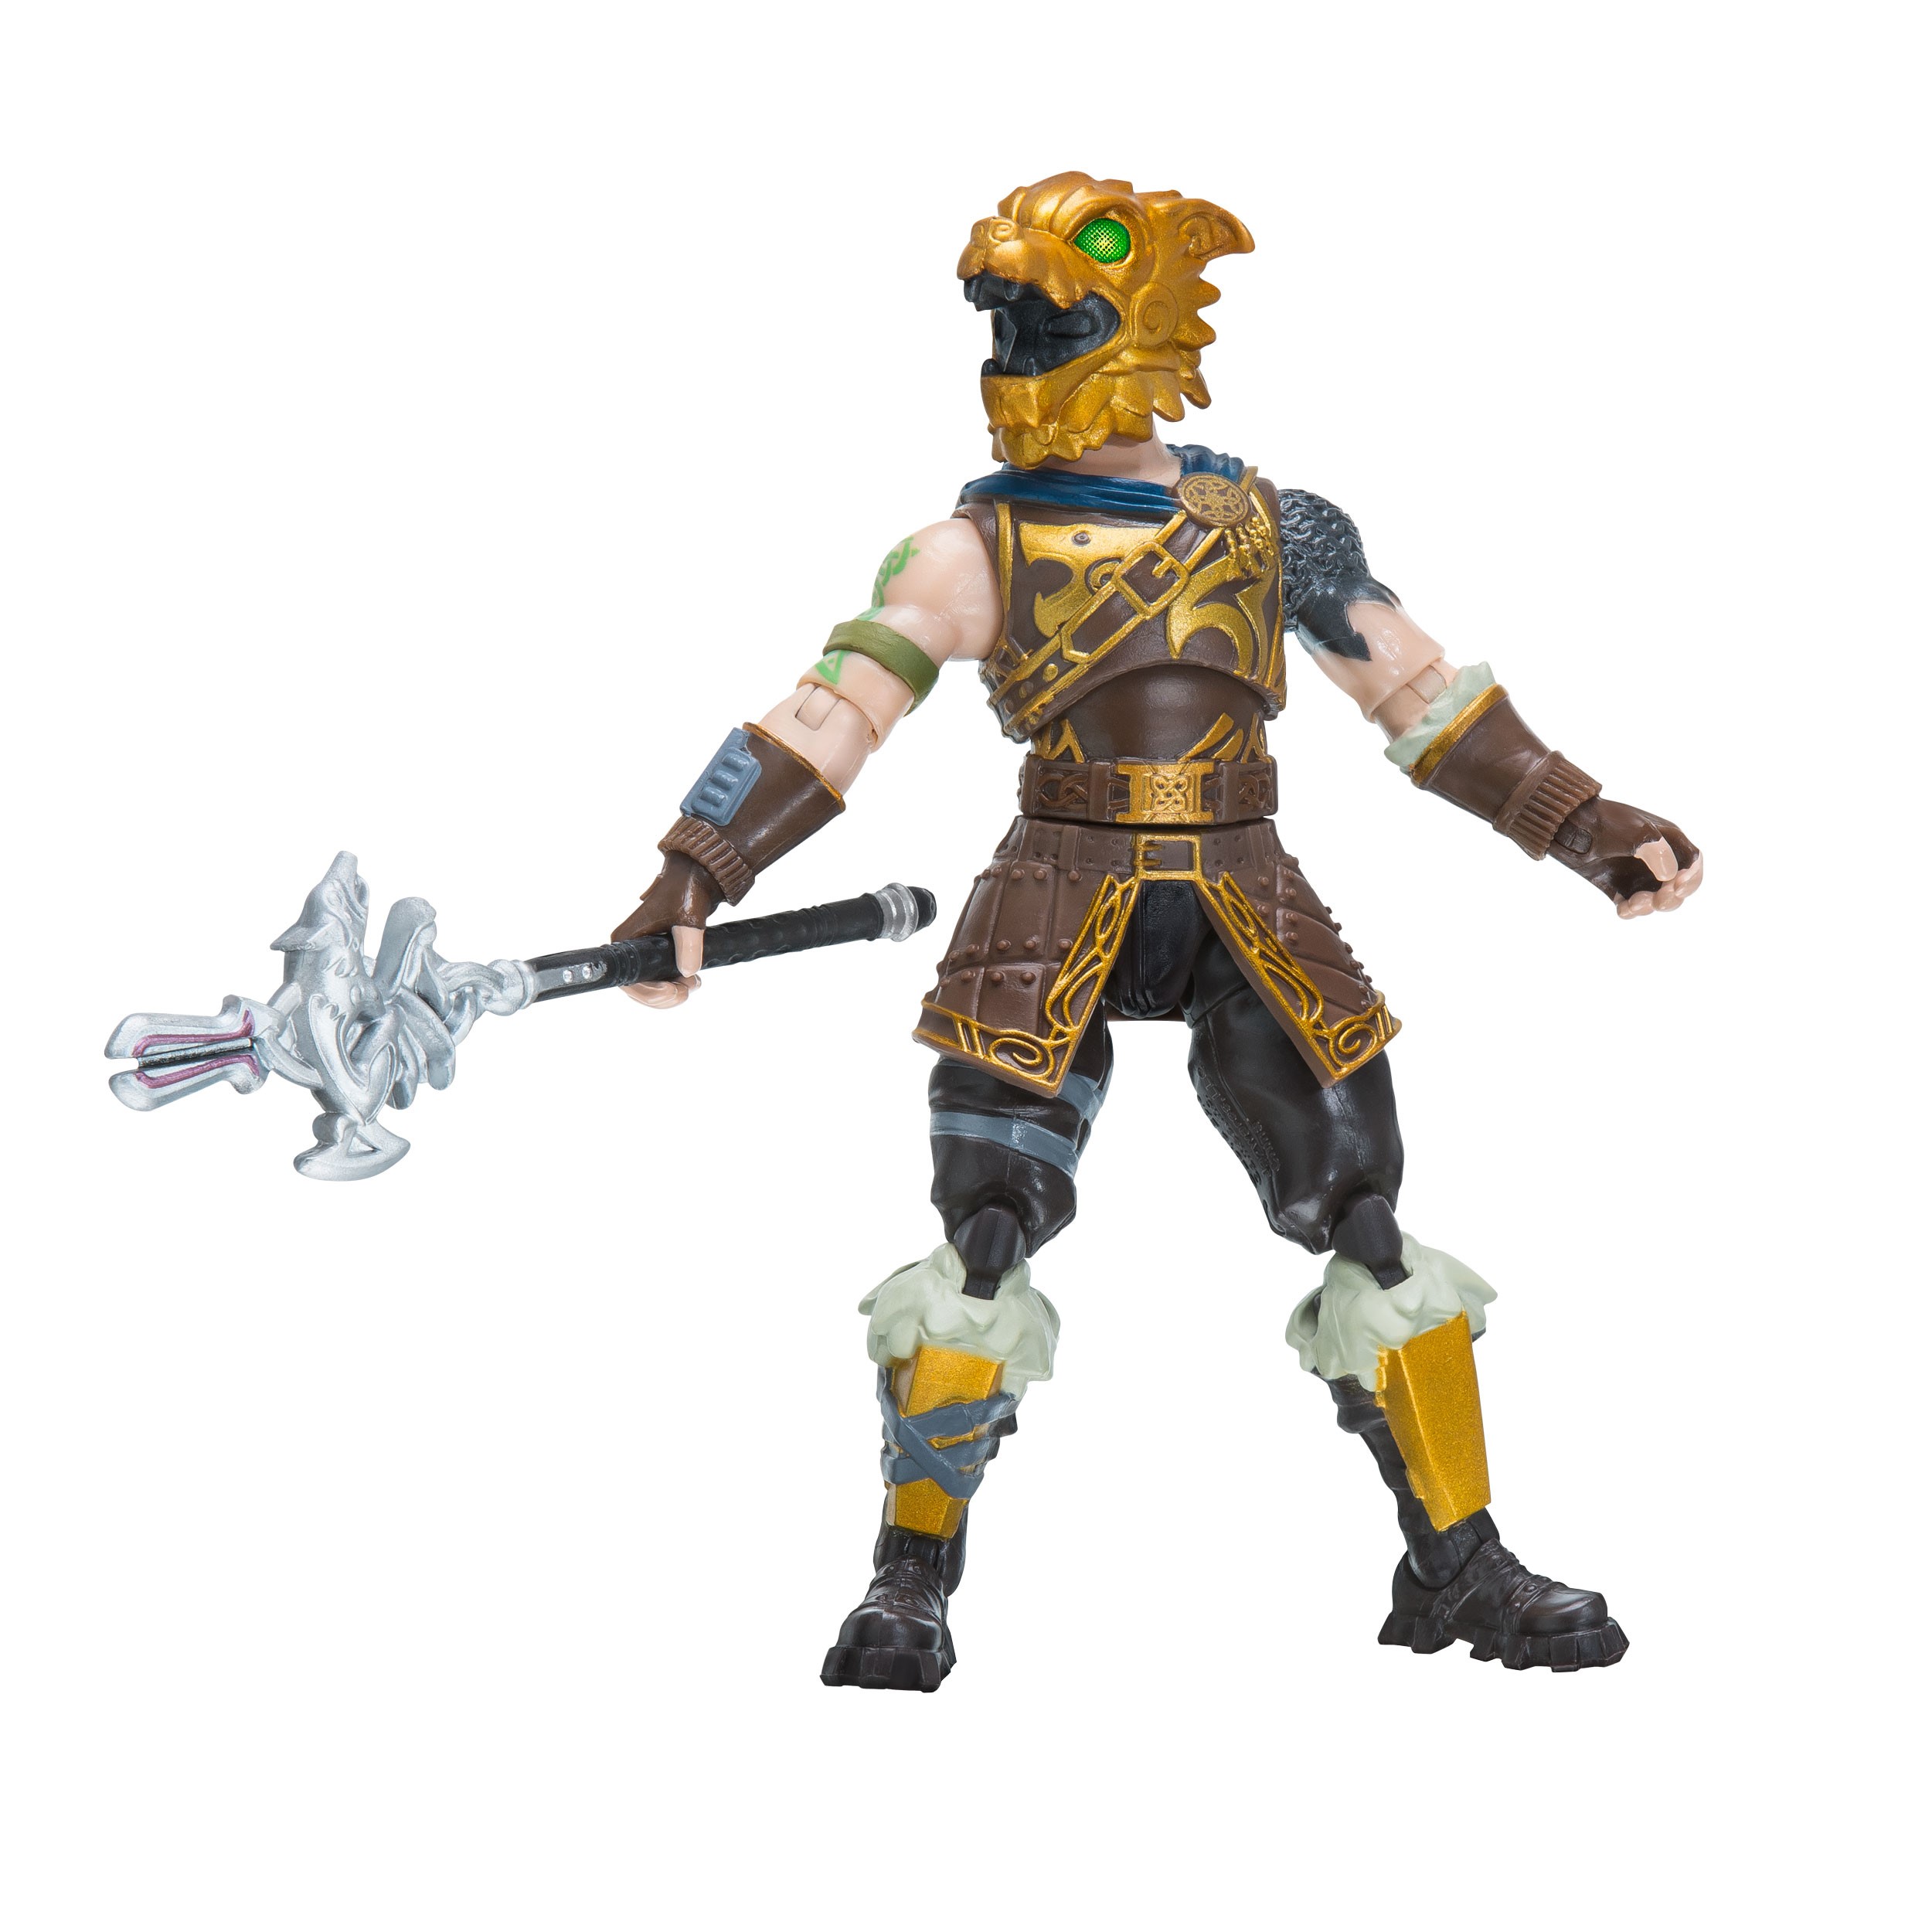 Fortnite Solo Mode Core Figure Pack, Battle Hound - image 1 of 5